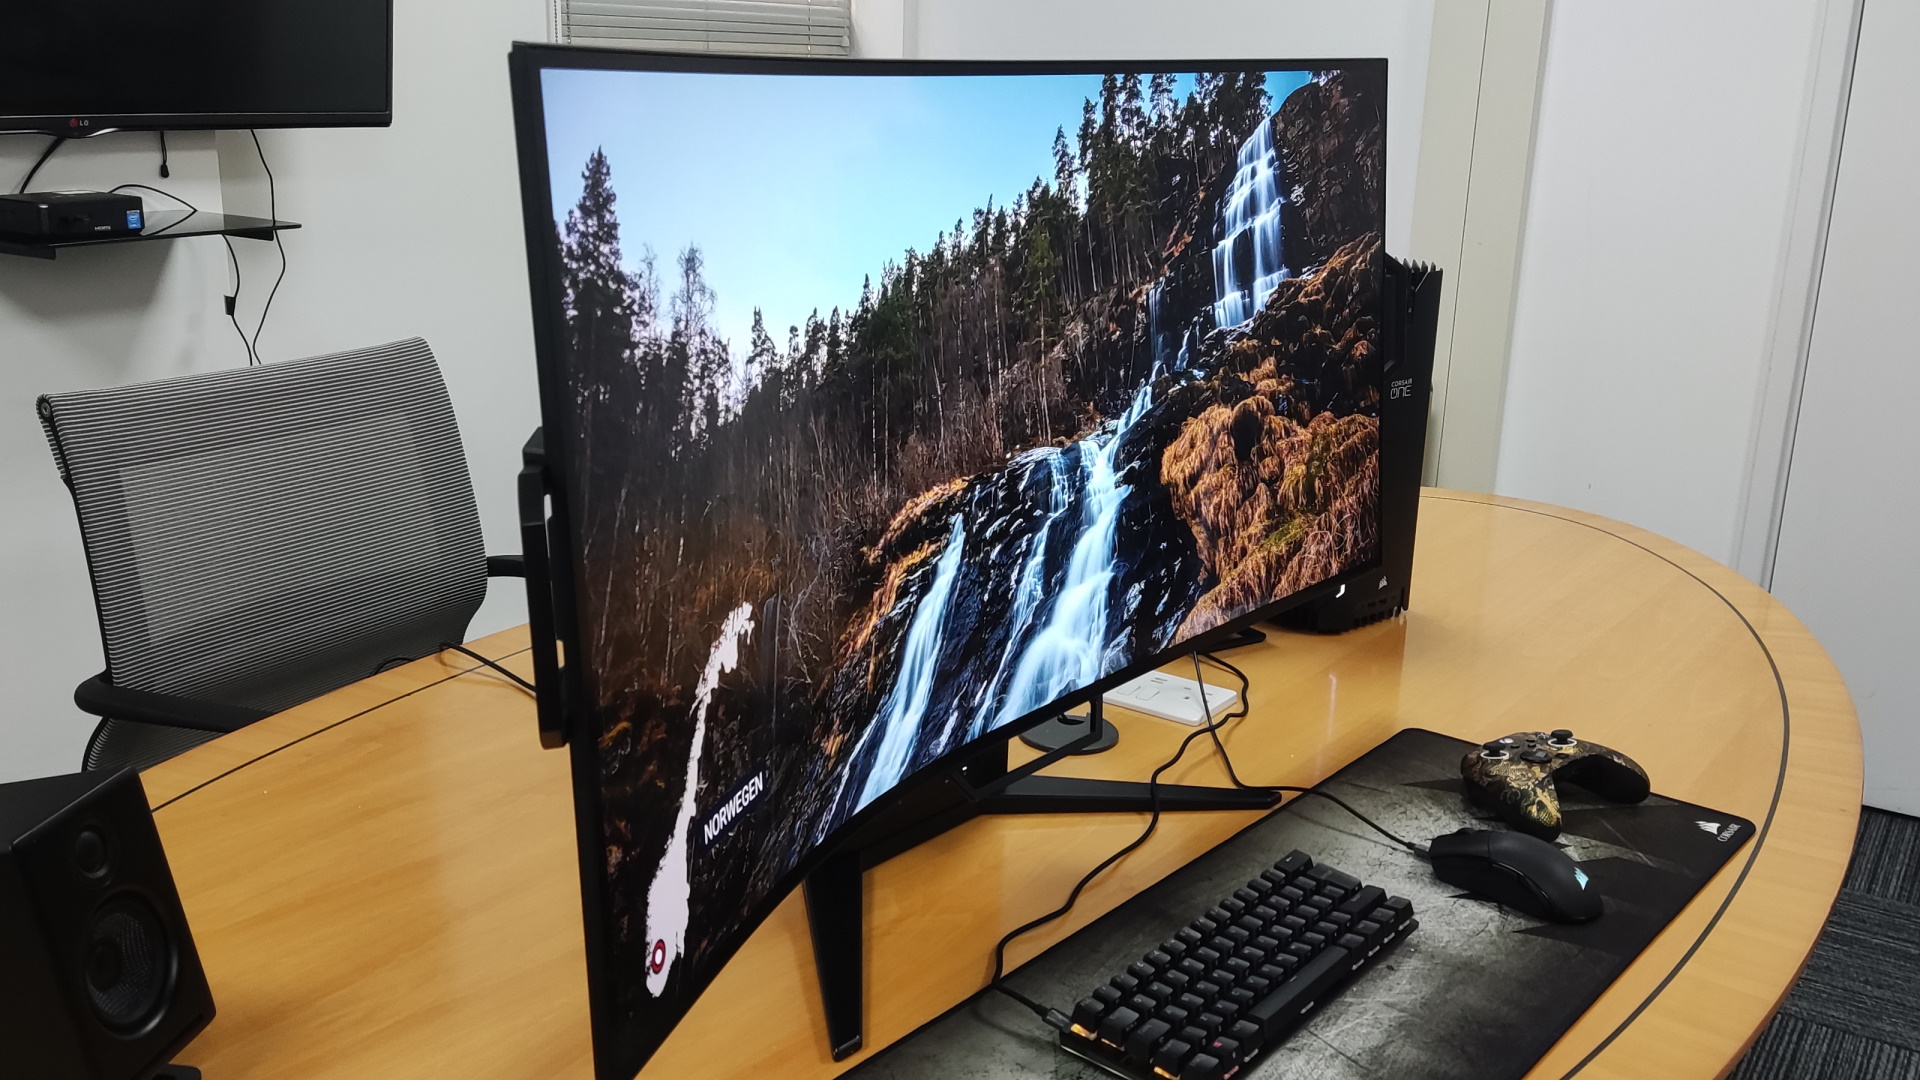 Corsair's new flexible 45 OLED monitor goes from flat to curved: Digital  Photography Review